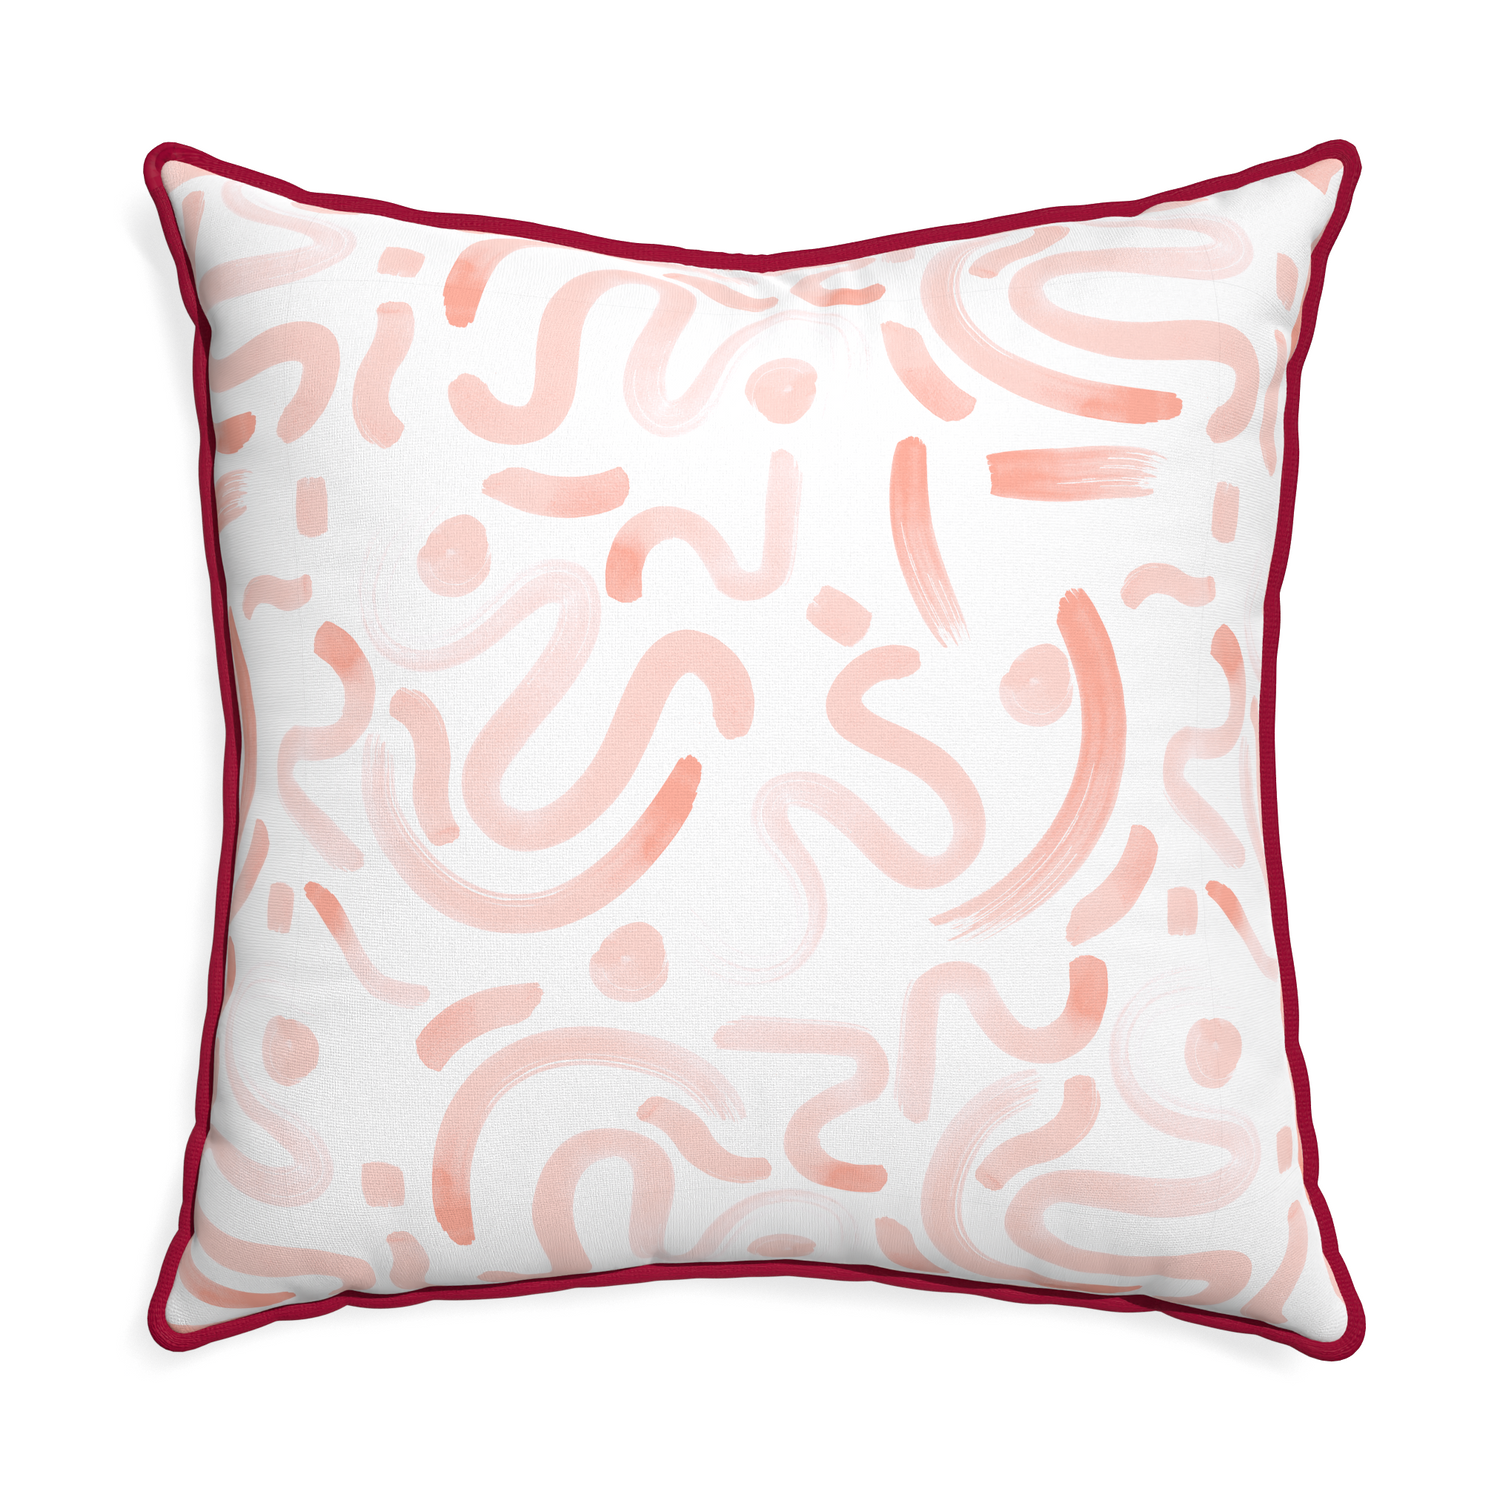 Euro-sham hockney pink custom pink graphicpillow with raspberry piping on white background